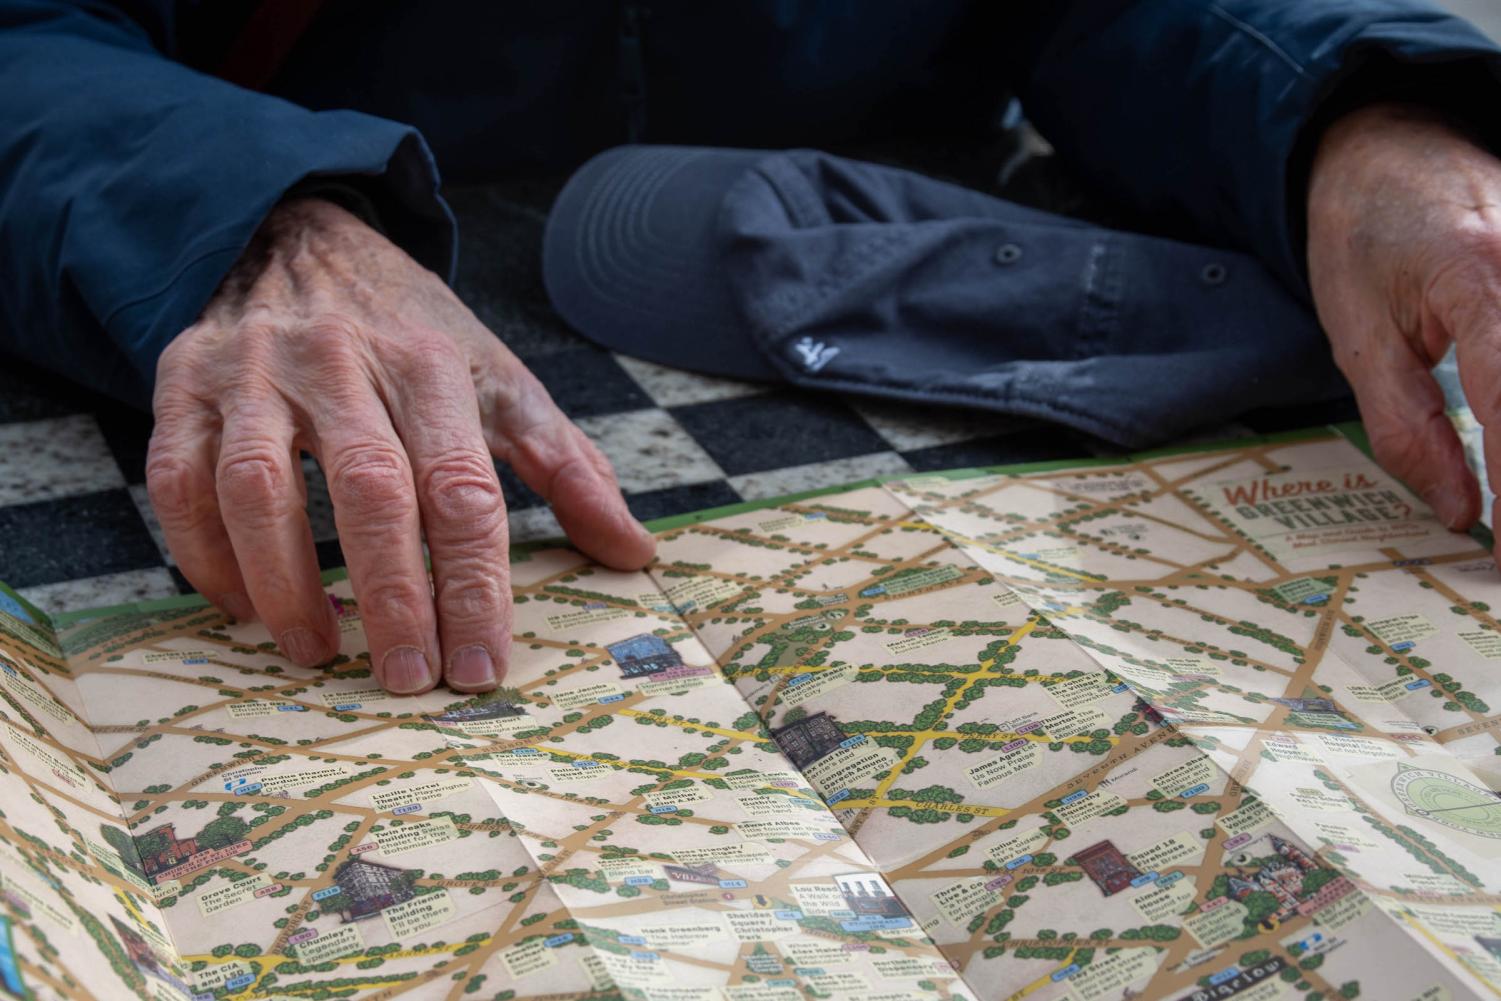 Alan Grossman's hands are shown placed on his map of Greenwich Village, on top of a chess table. He is wearing a navy blue jacket, and his navy blue baseball cap is on the table.